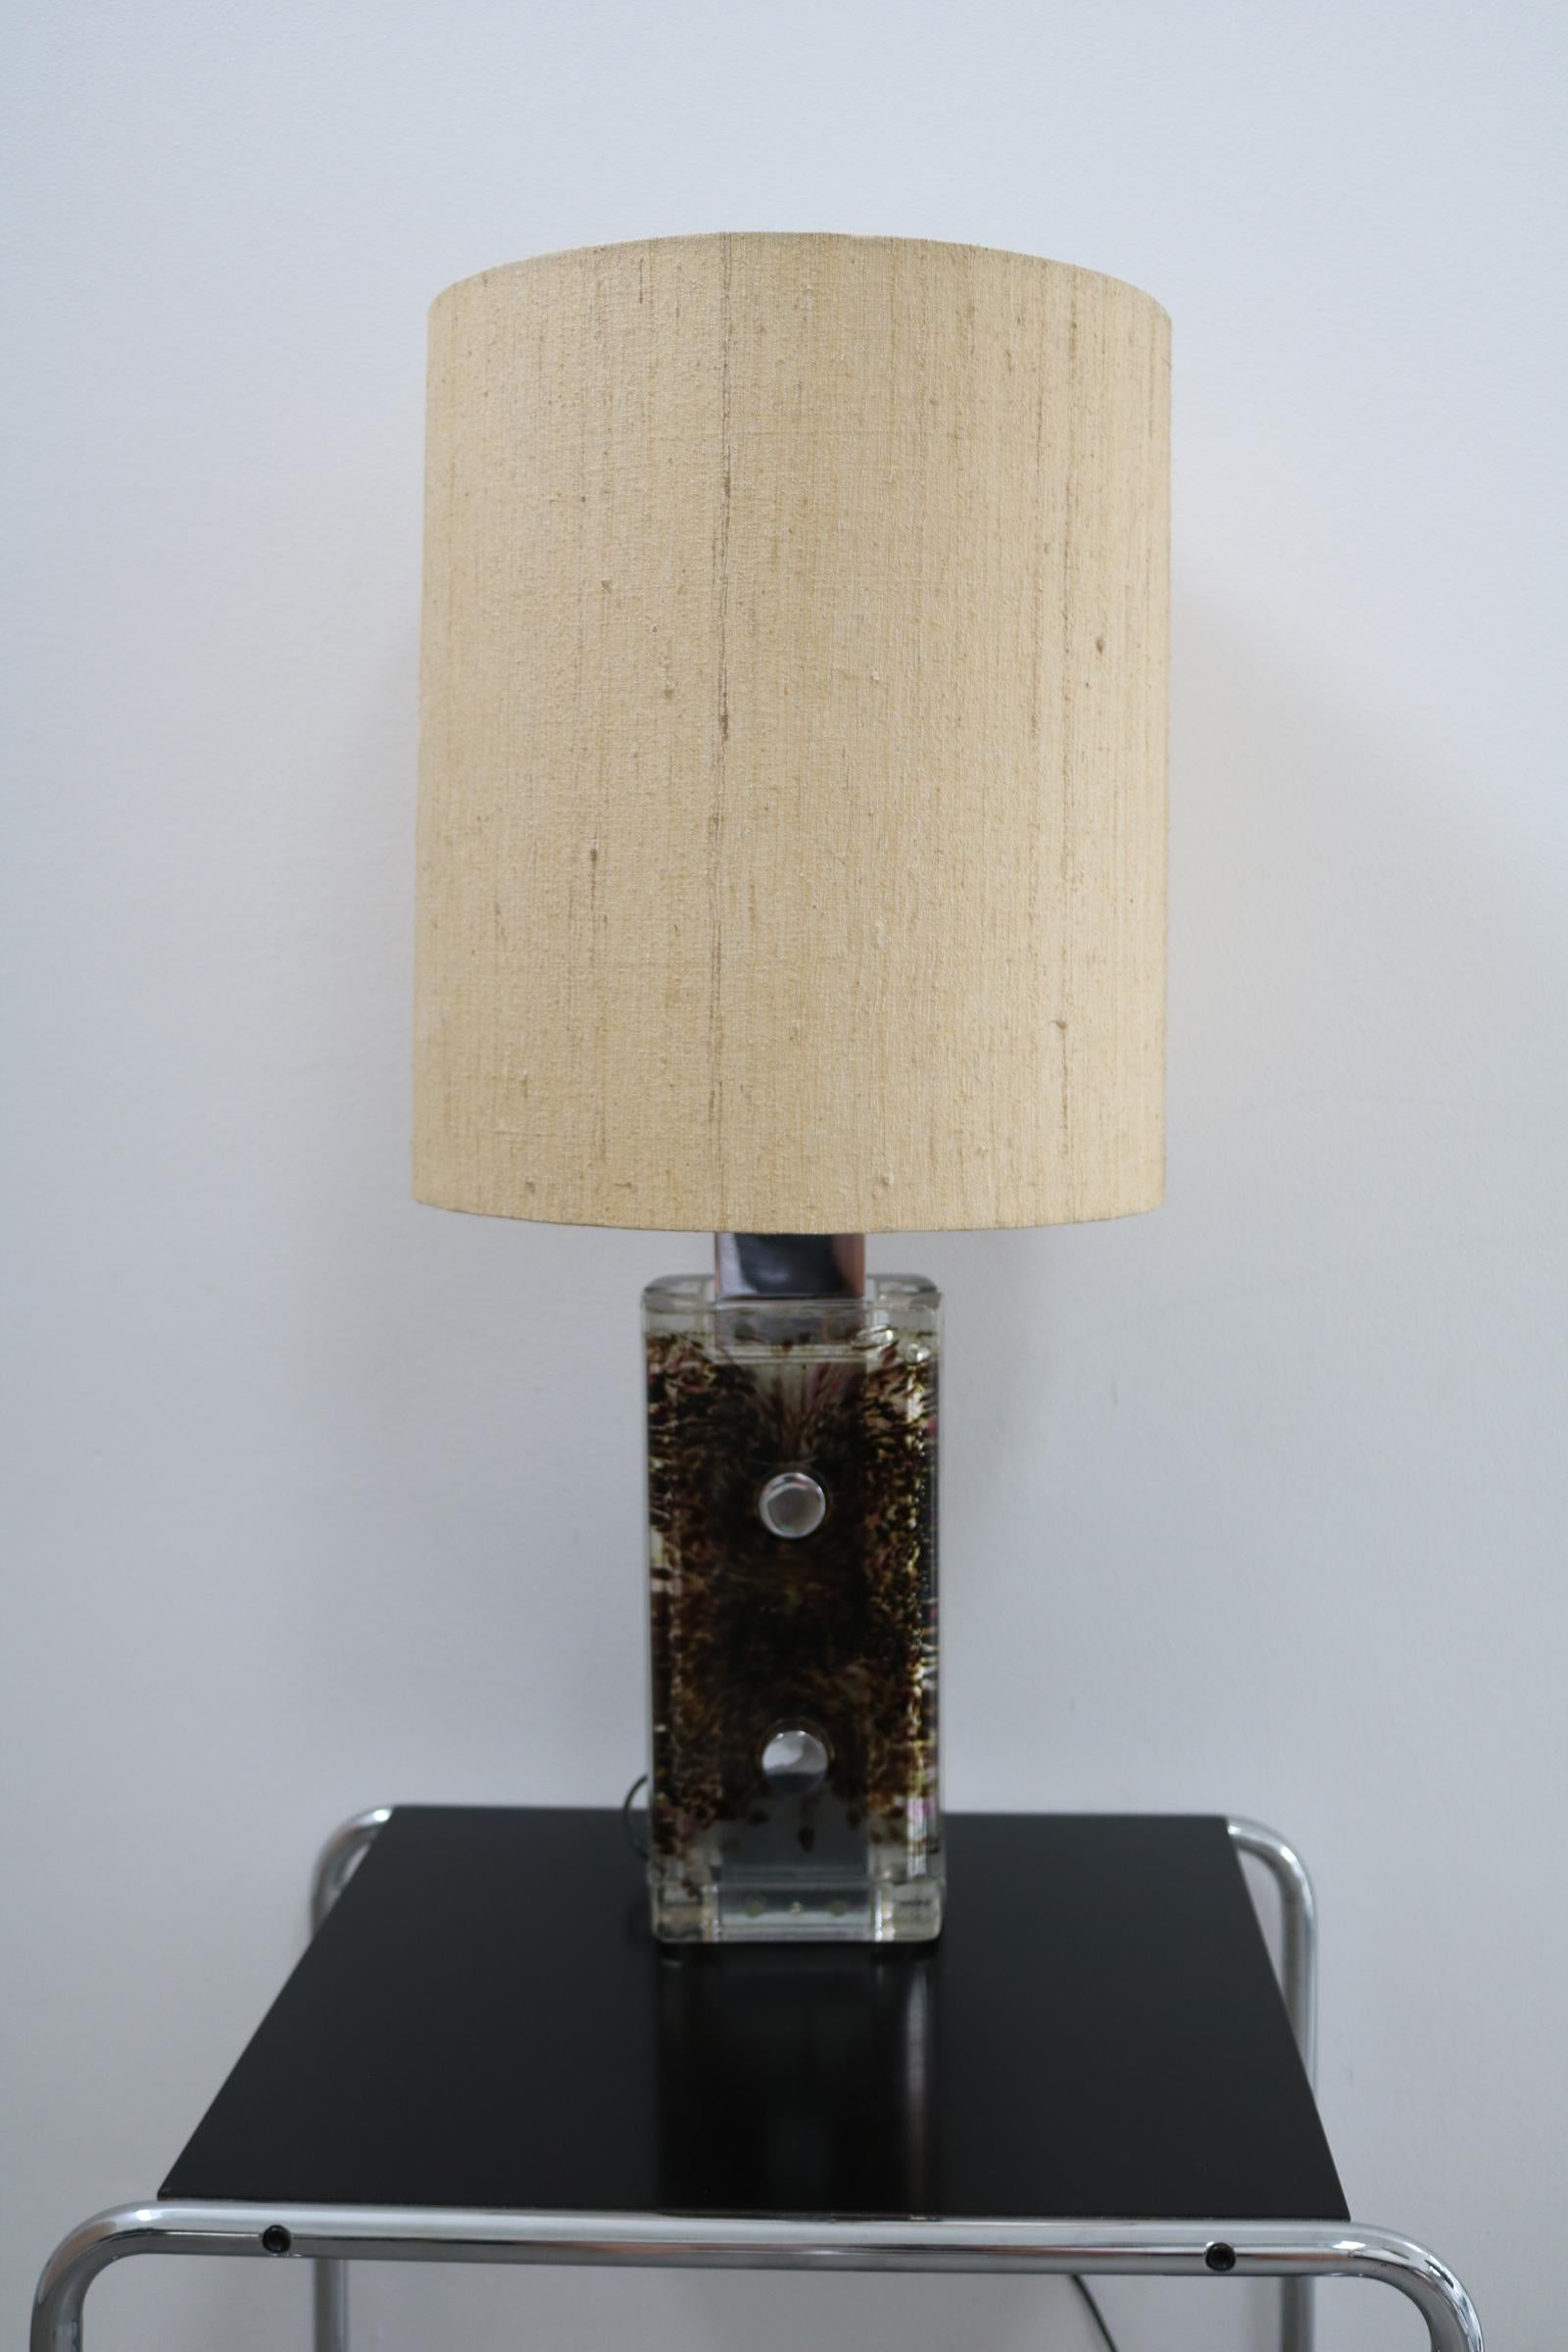 Giant table lamp in Murano Glass by Staff, 1970s.